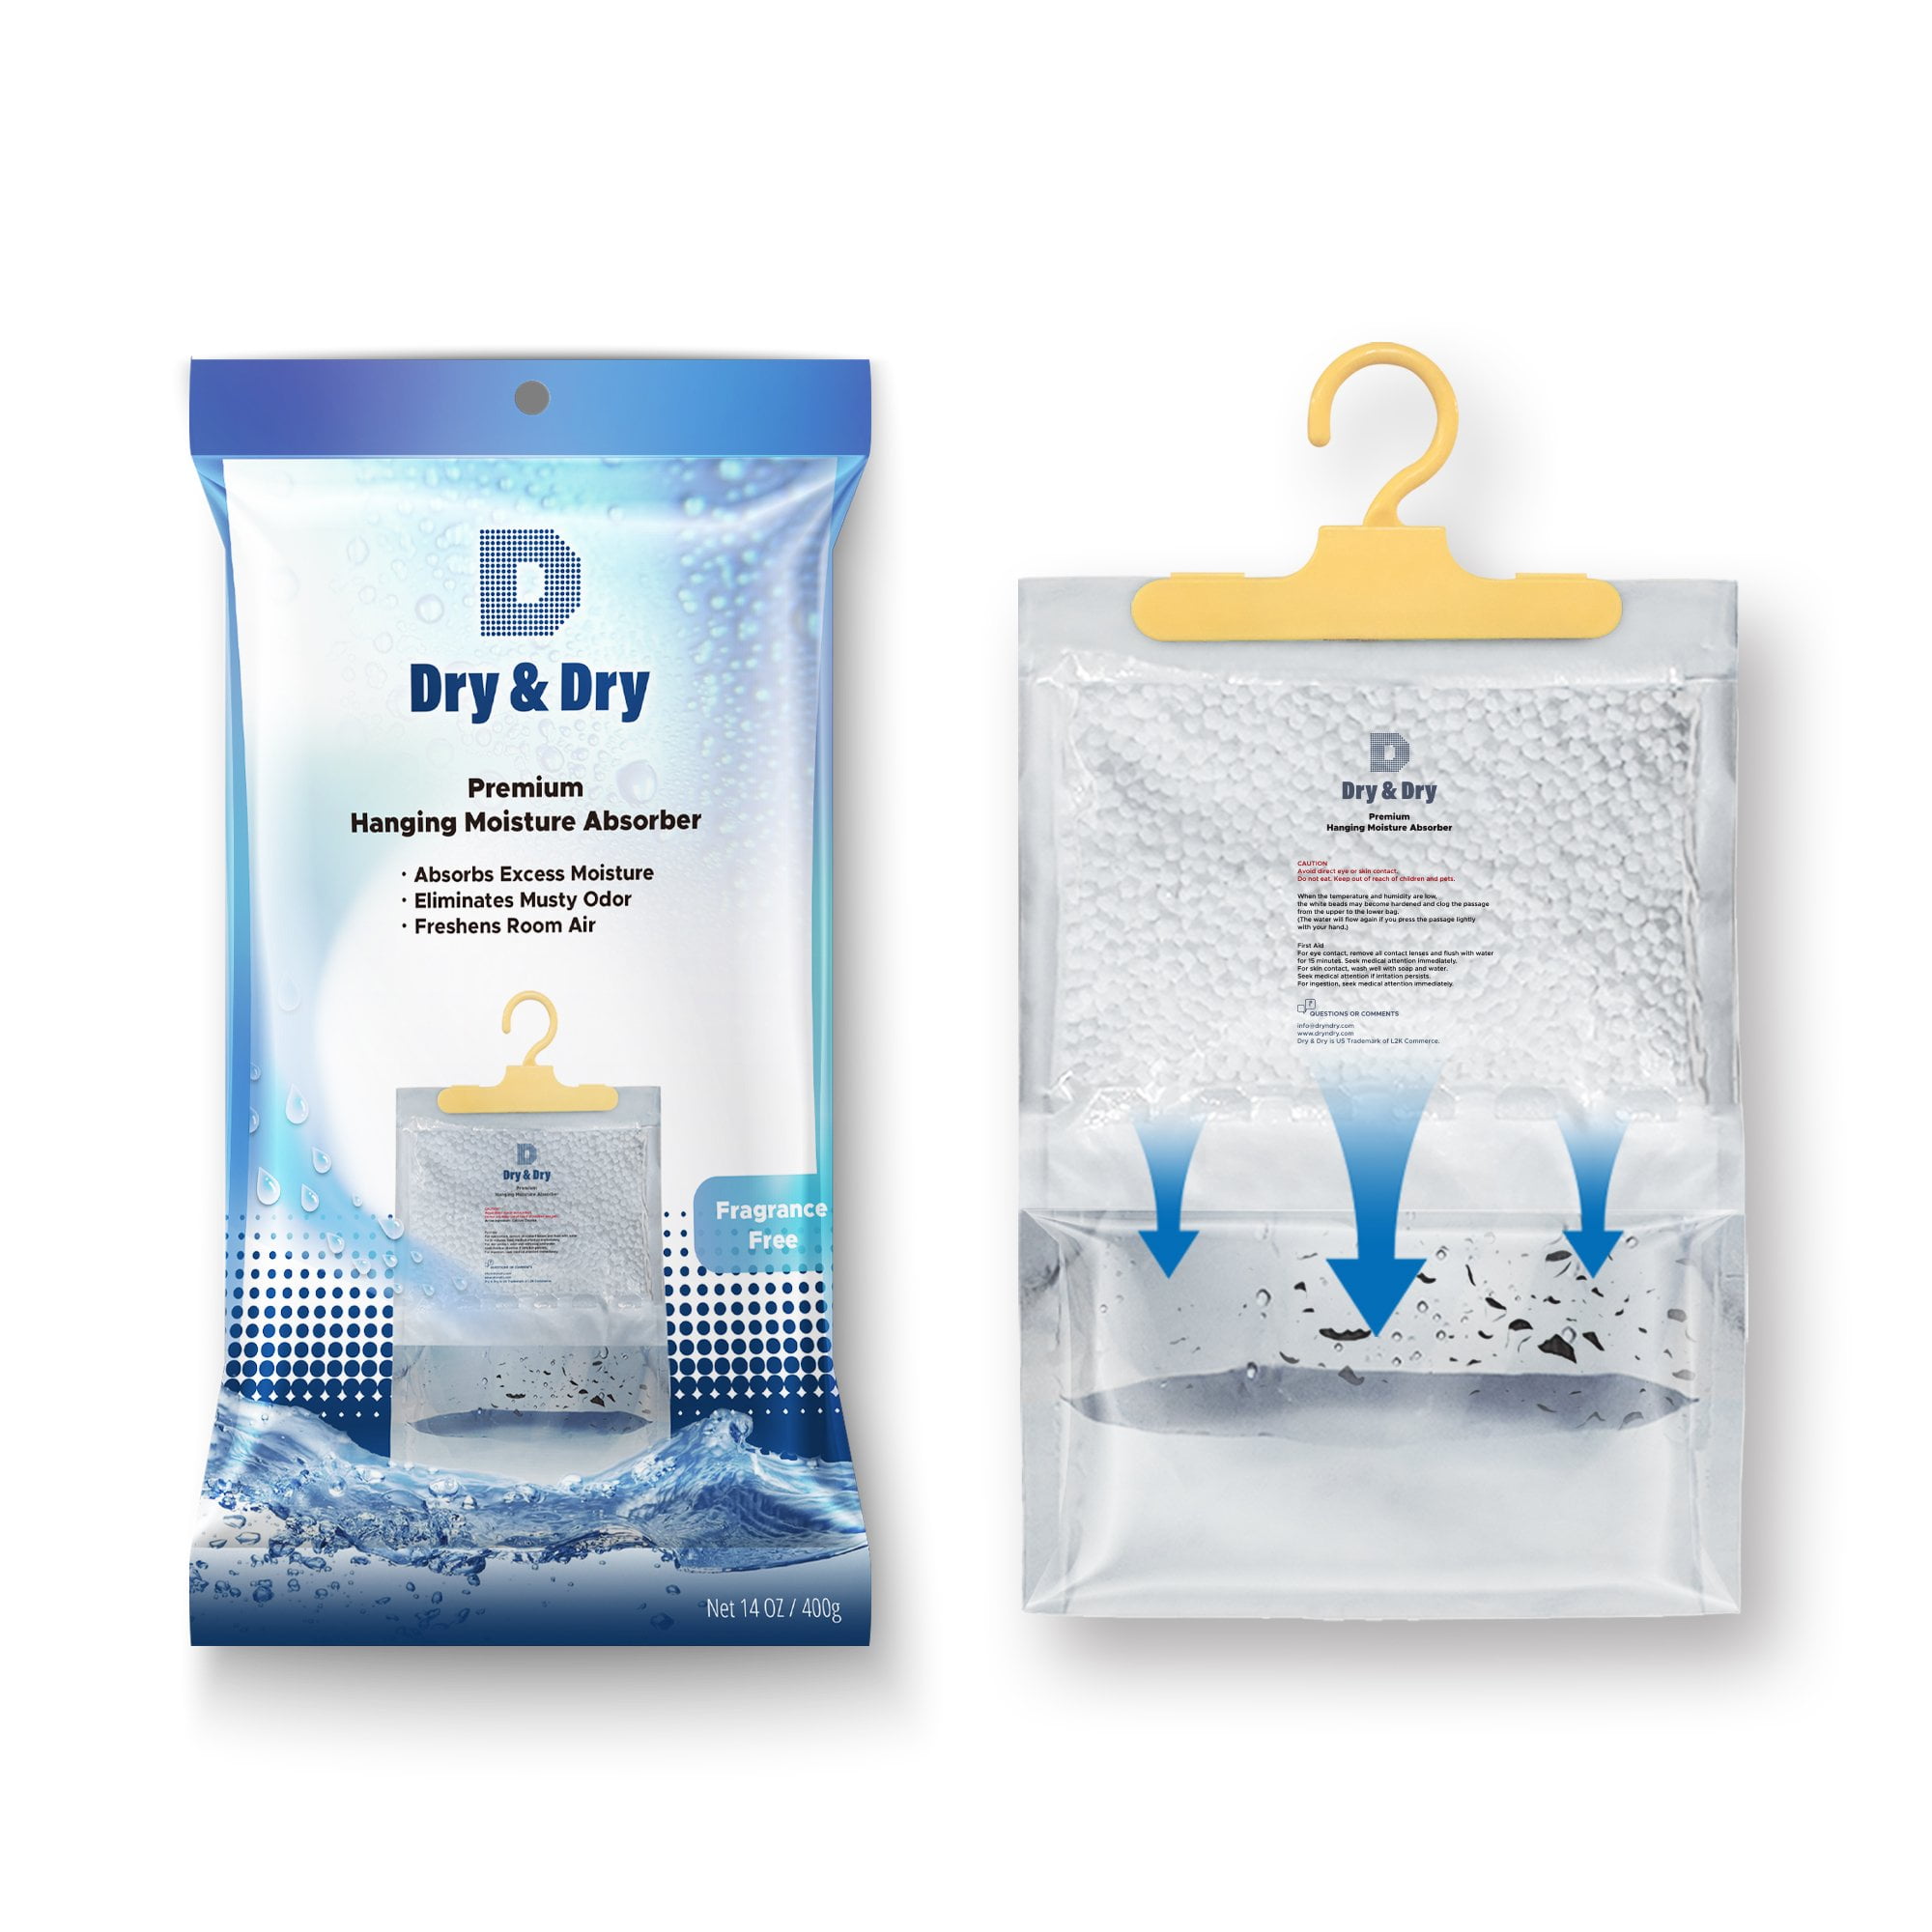 Net 14 Oz/Pack Dry & Dry Laundry Rooms. Bathrooms 4 Packs Closets Premium Hanging Moisture Absorber to Control Excess Moisture for Basements 